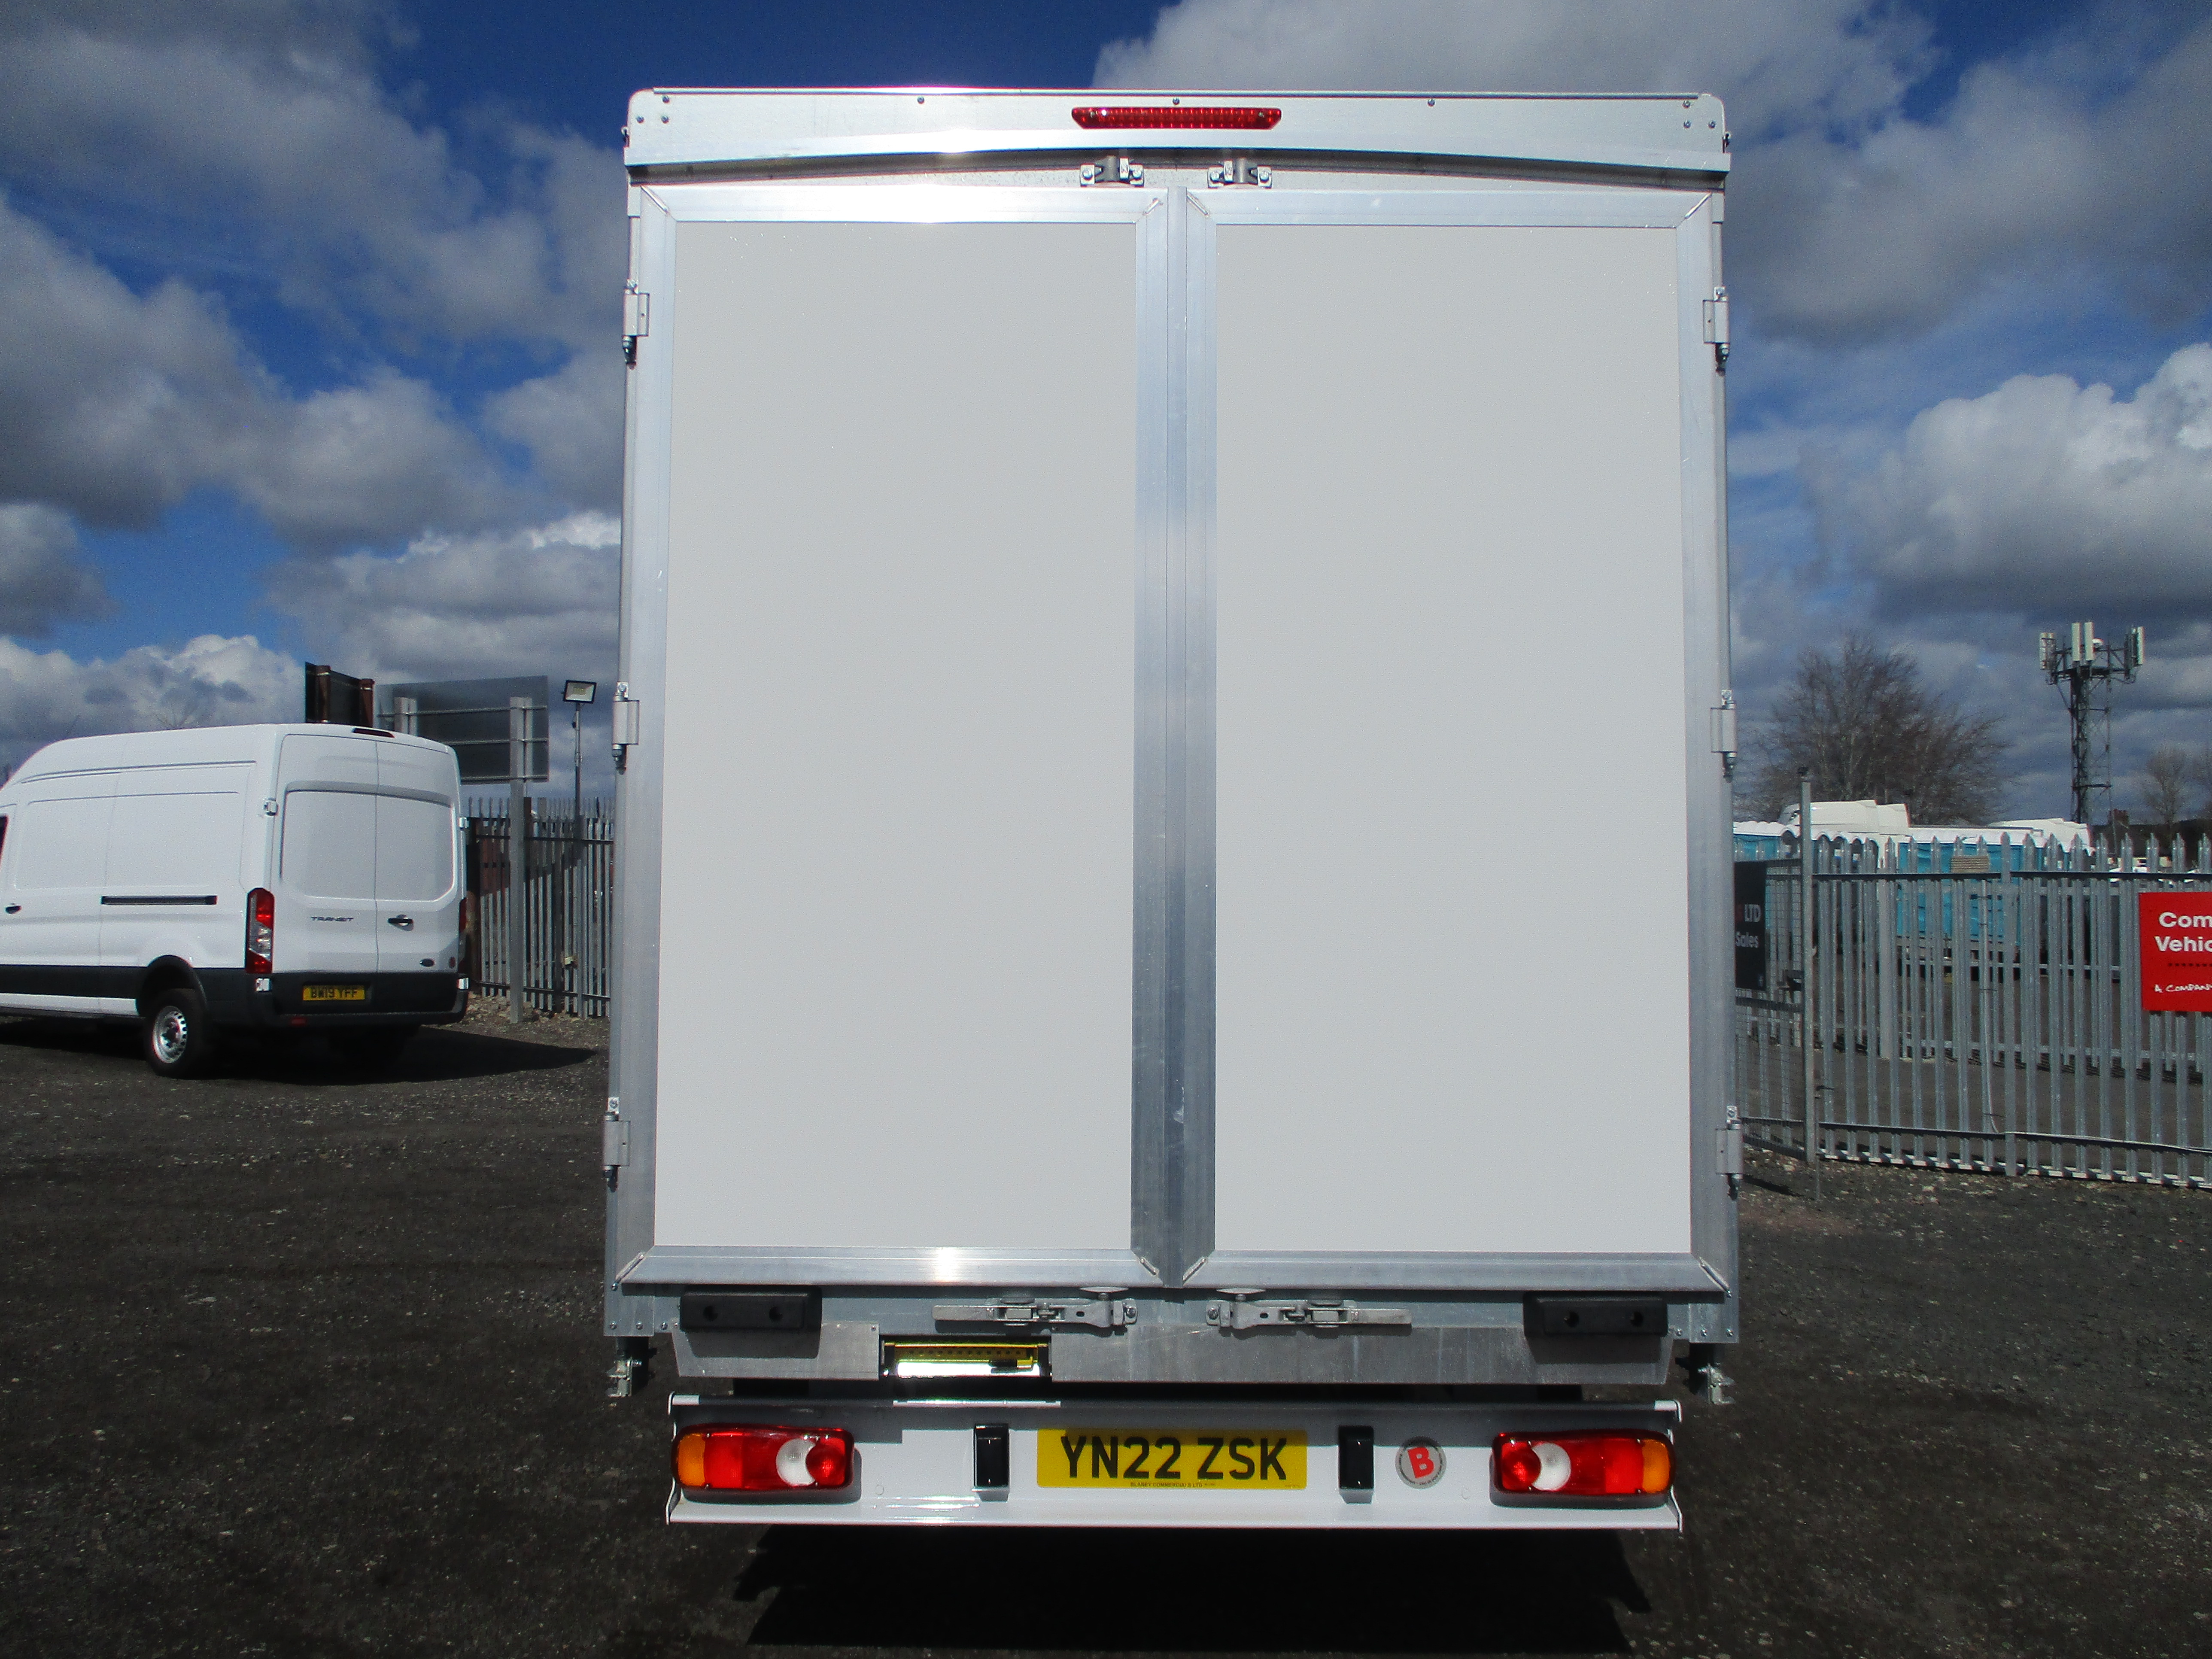 Fiat Ducato Curtainsider Series 8 with Barn Doors 2.3 Diesel 140PS, BIG SPEC including AIR CON ( £1,400 OFF )